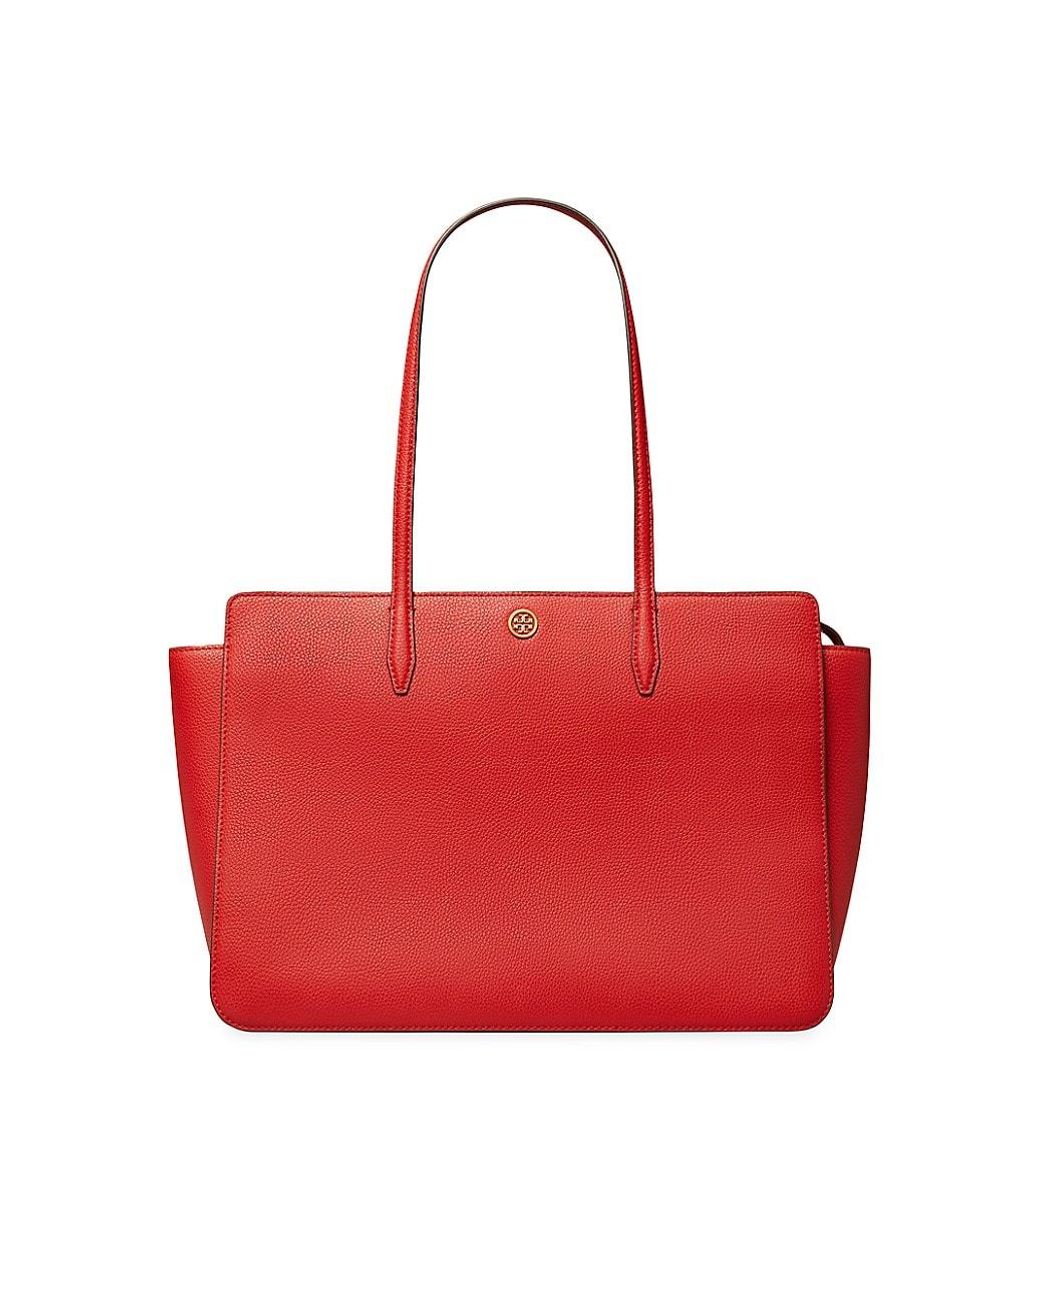 Tory Burch Robinson Pebble Leather Tote in Red | Lyst